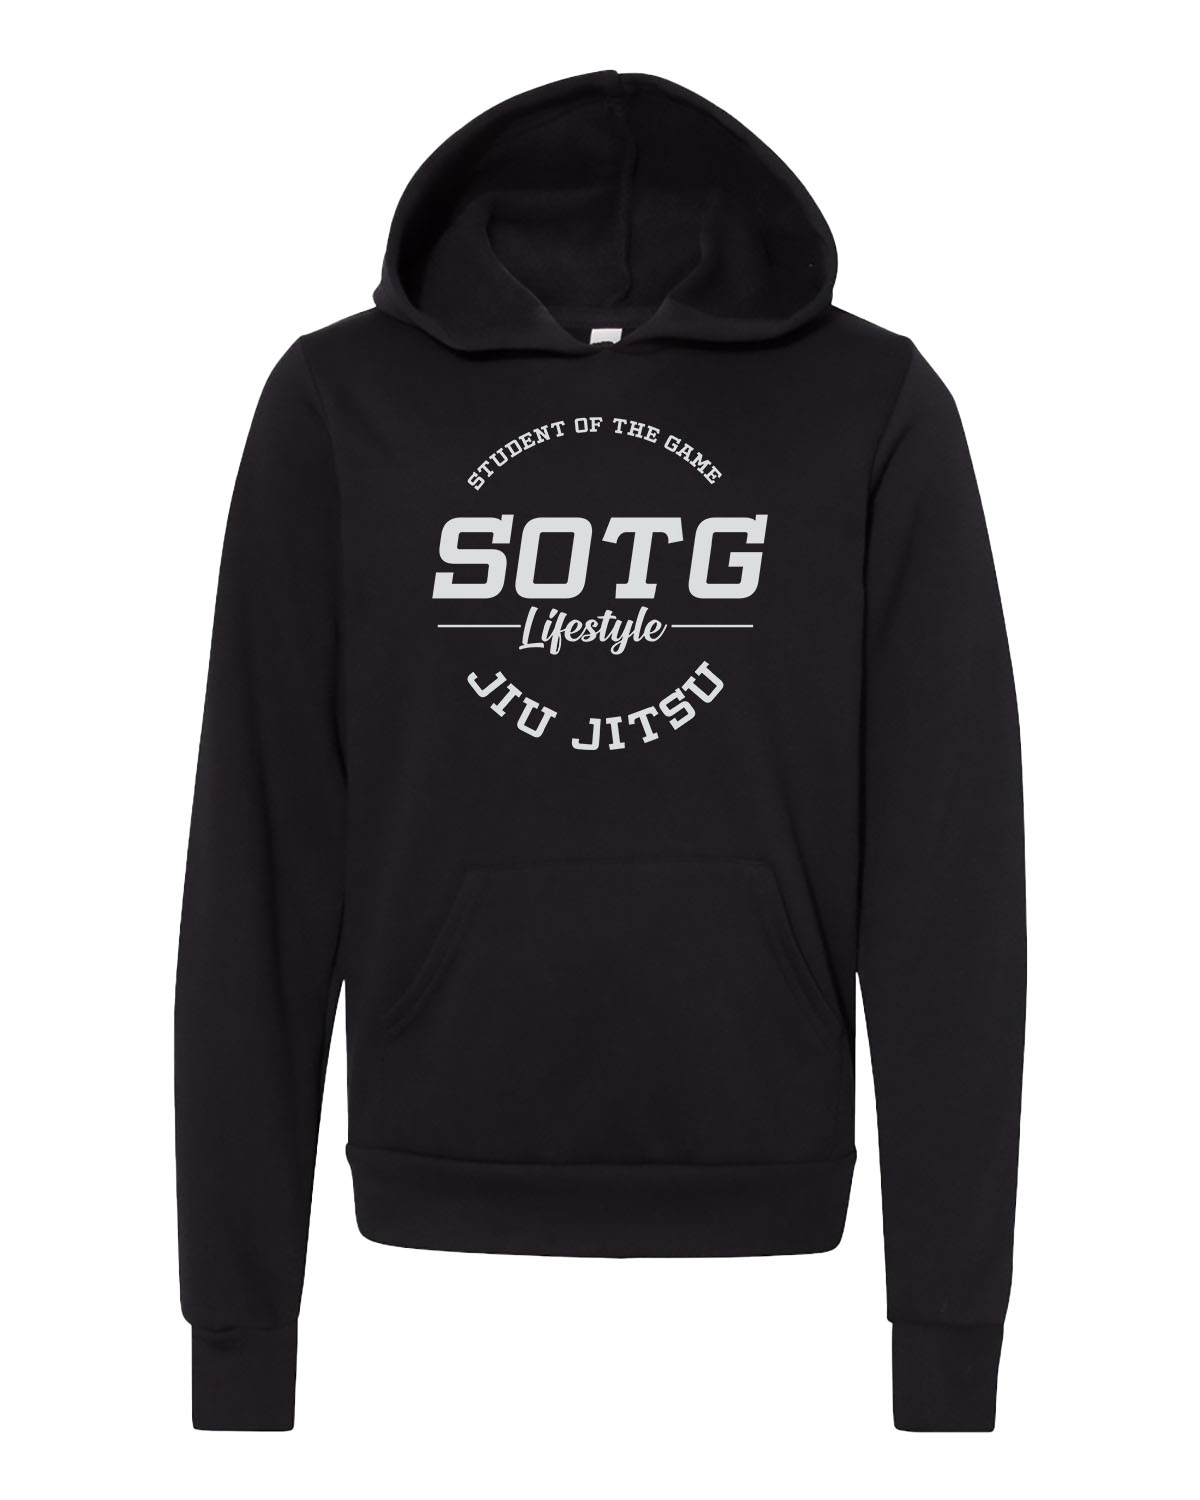 SOTG Lifestyle // Youth Hoodie